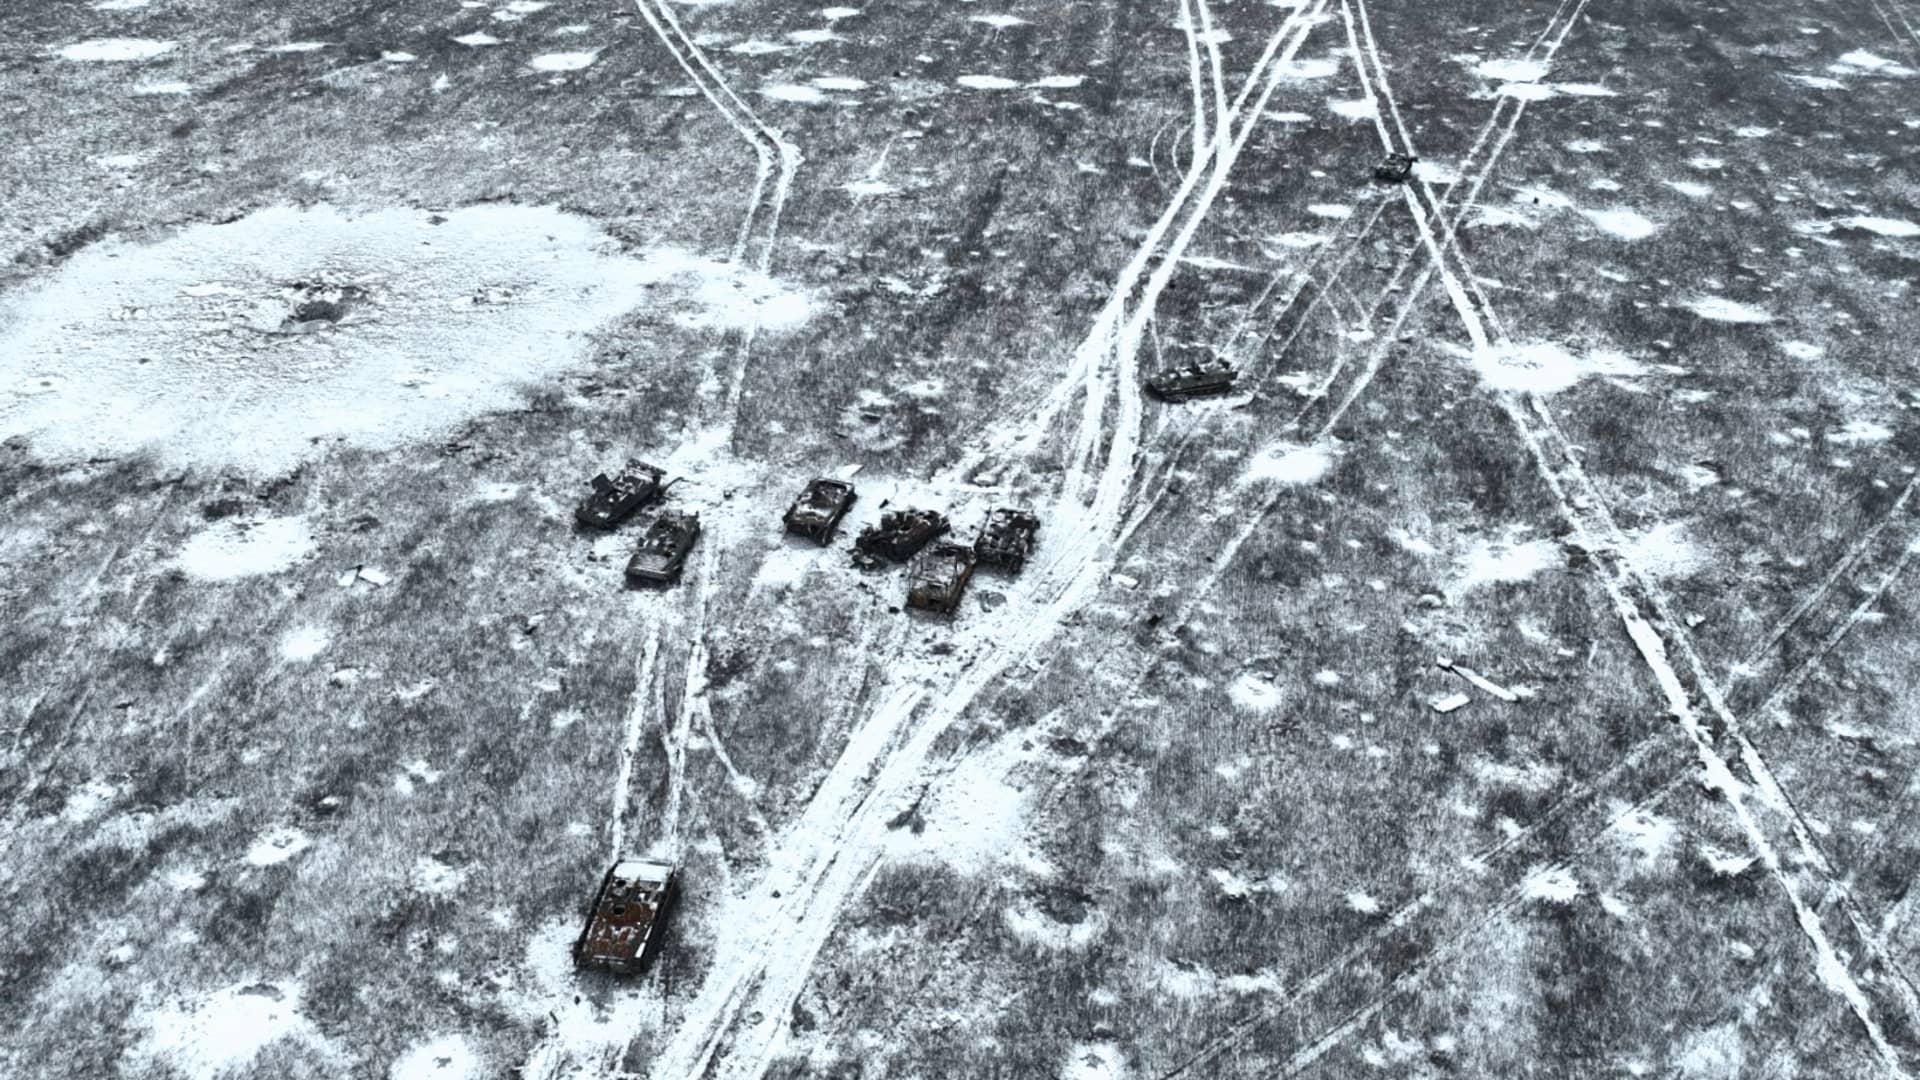  A snowy field with traces of artillery and recently destroyed Russian heavy equipment on the outskirts of the city on January 25, 2023 in Avdiivka, Ukraine. Both Ukraine and Russia have recently claimed gains in the Avdiivka, where Russia is continuing a long-running campaign to capture the city, located in the Ukraine's eastern Donetsk Region. 